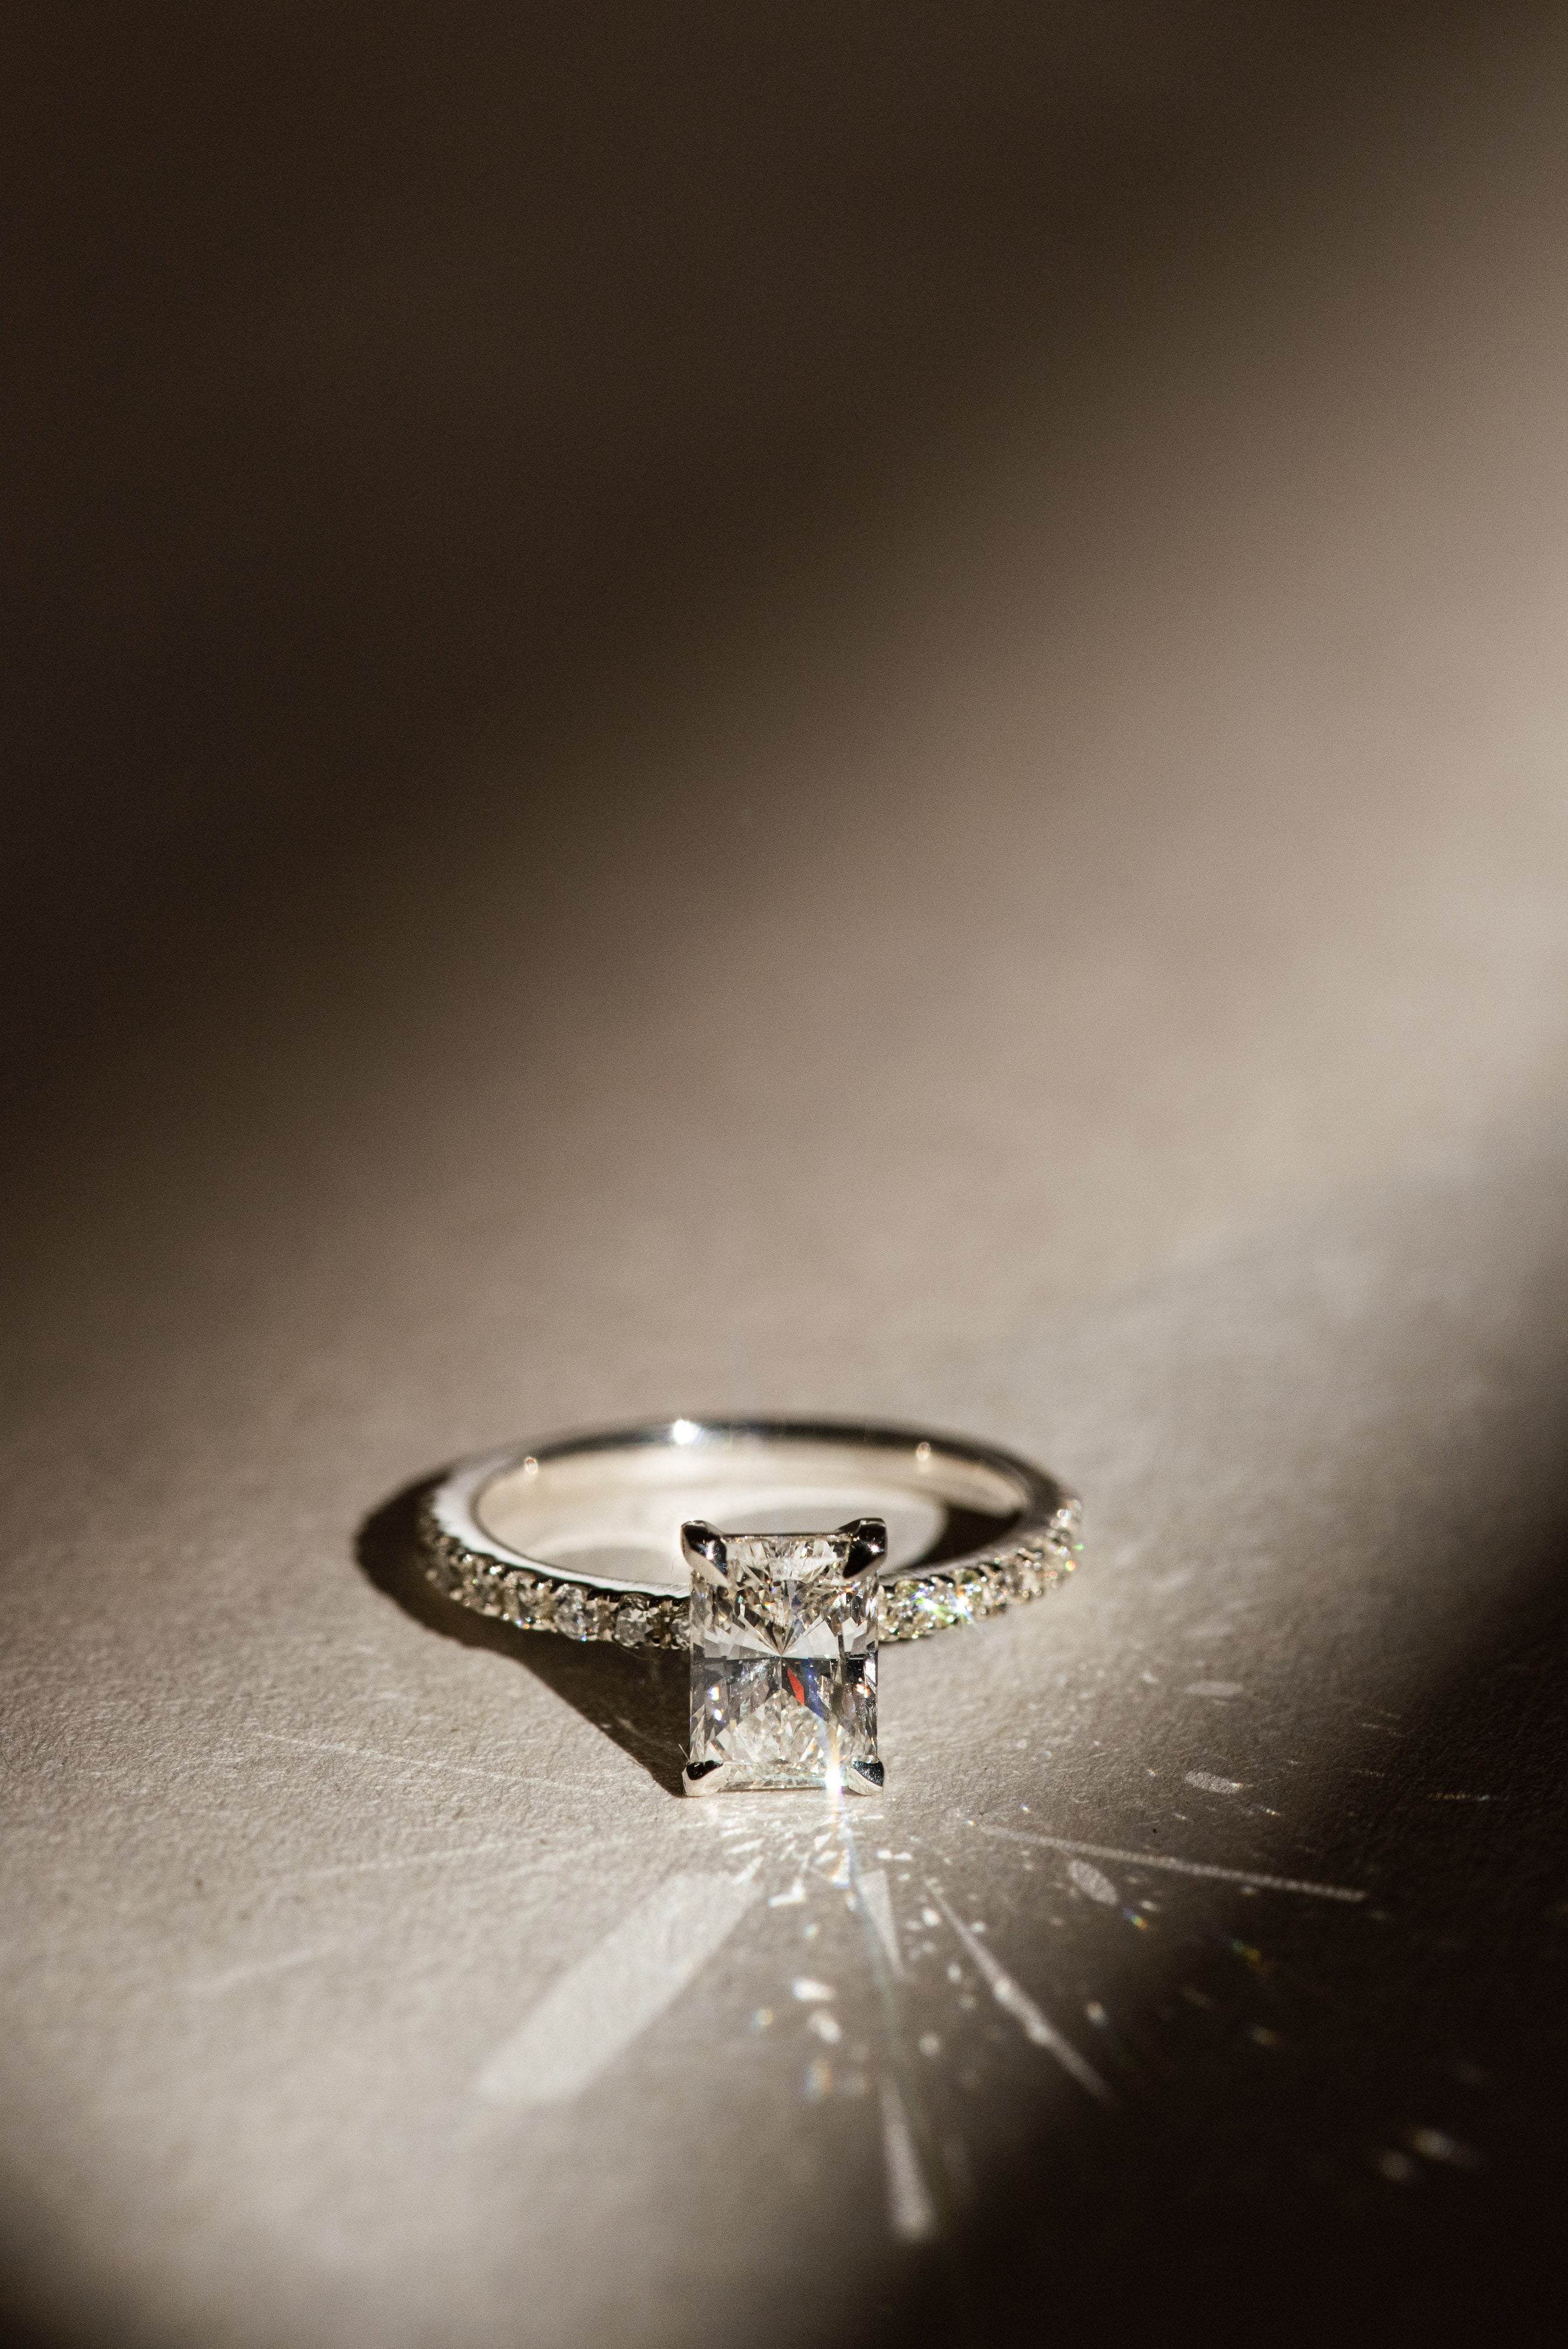 Dean & Dust - Bespoke Design - Radiant Diamond Solitaire Engagement Ring with Diamond Band